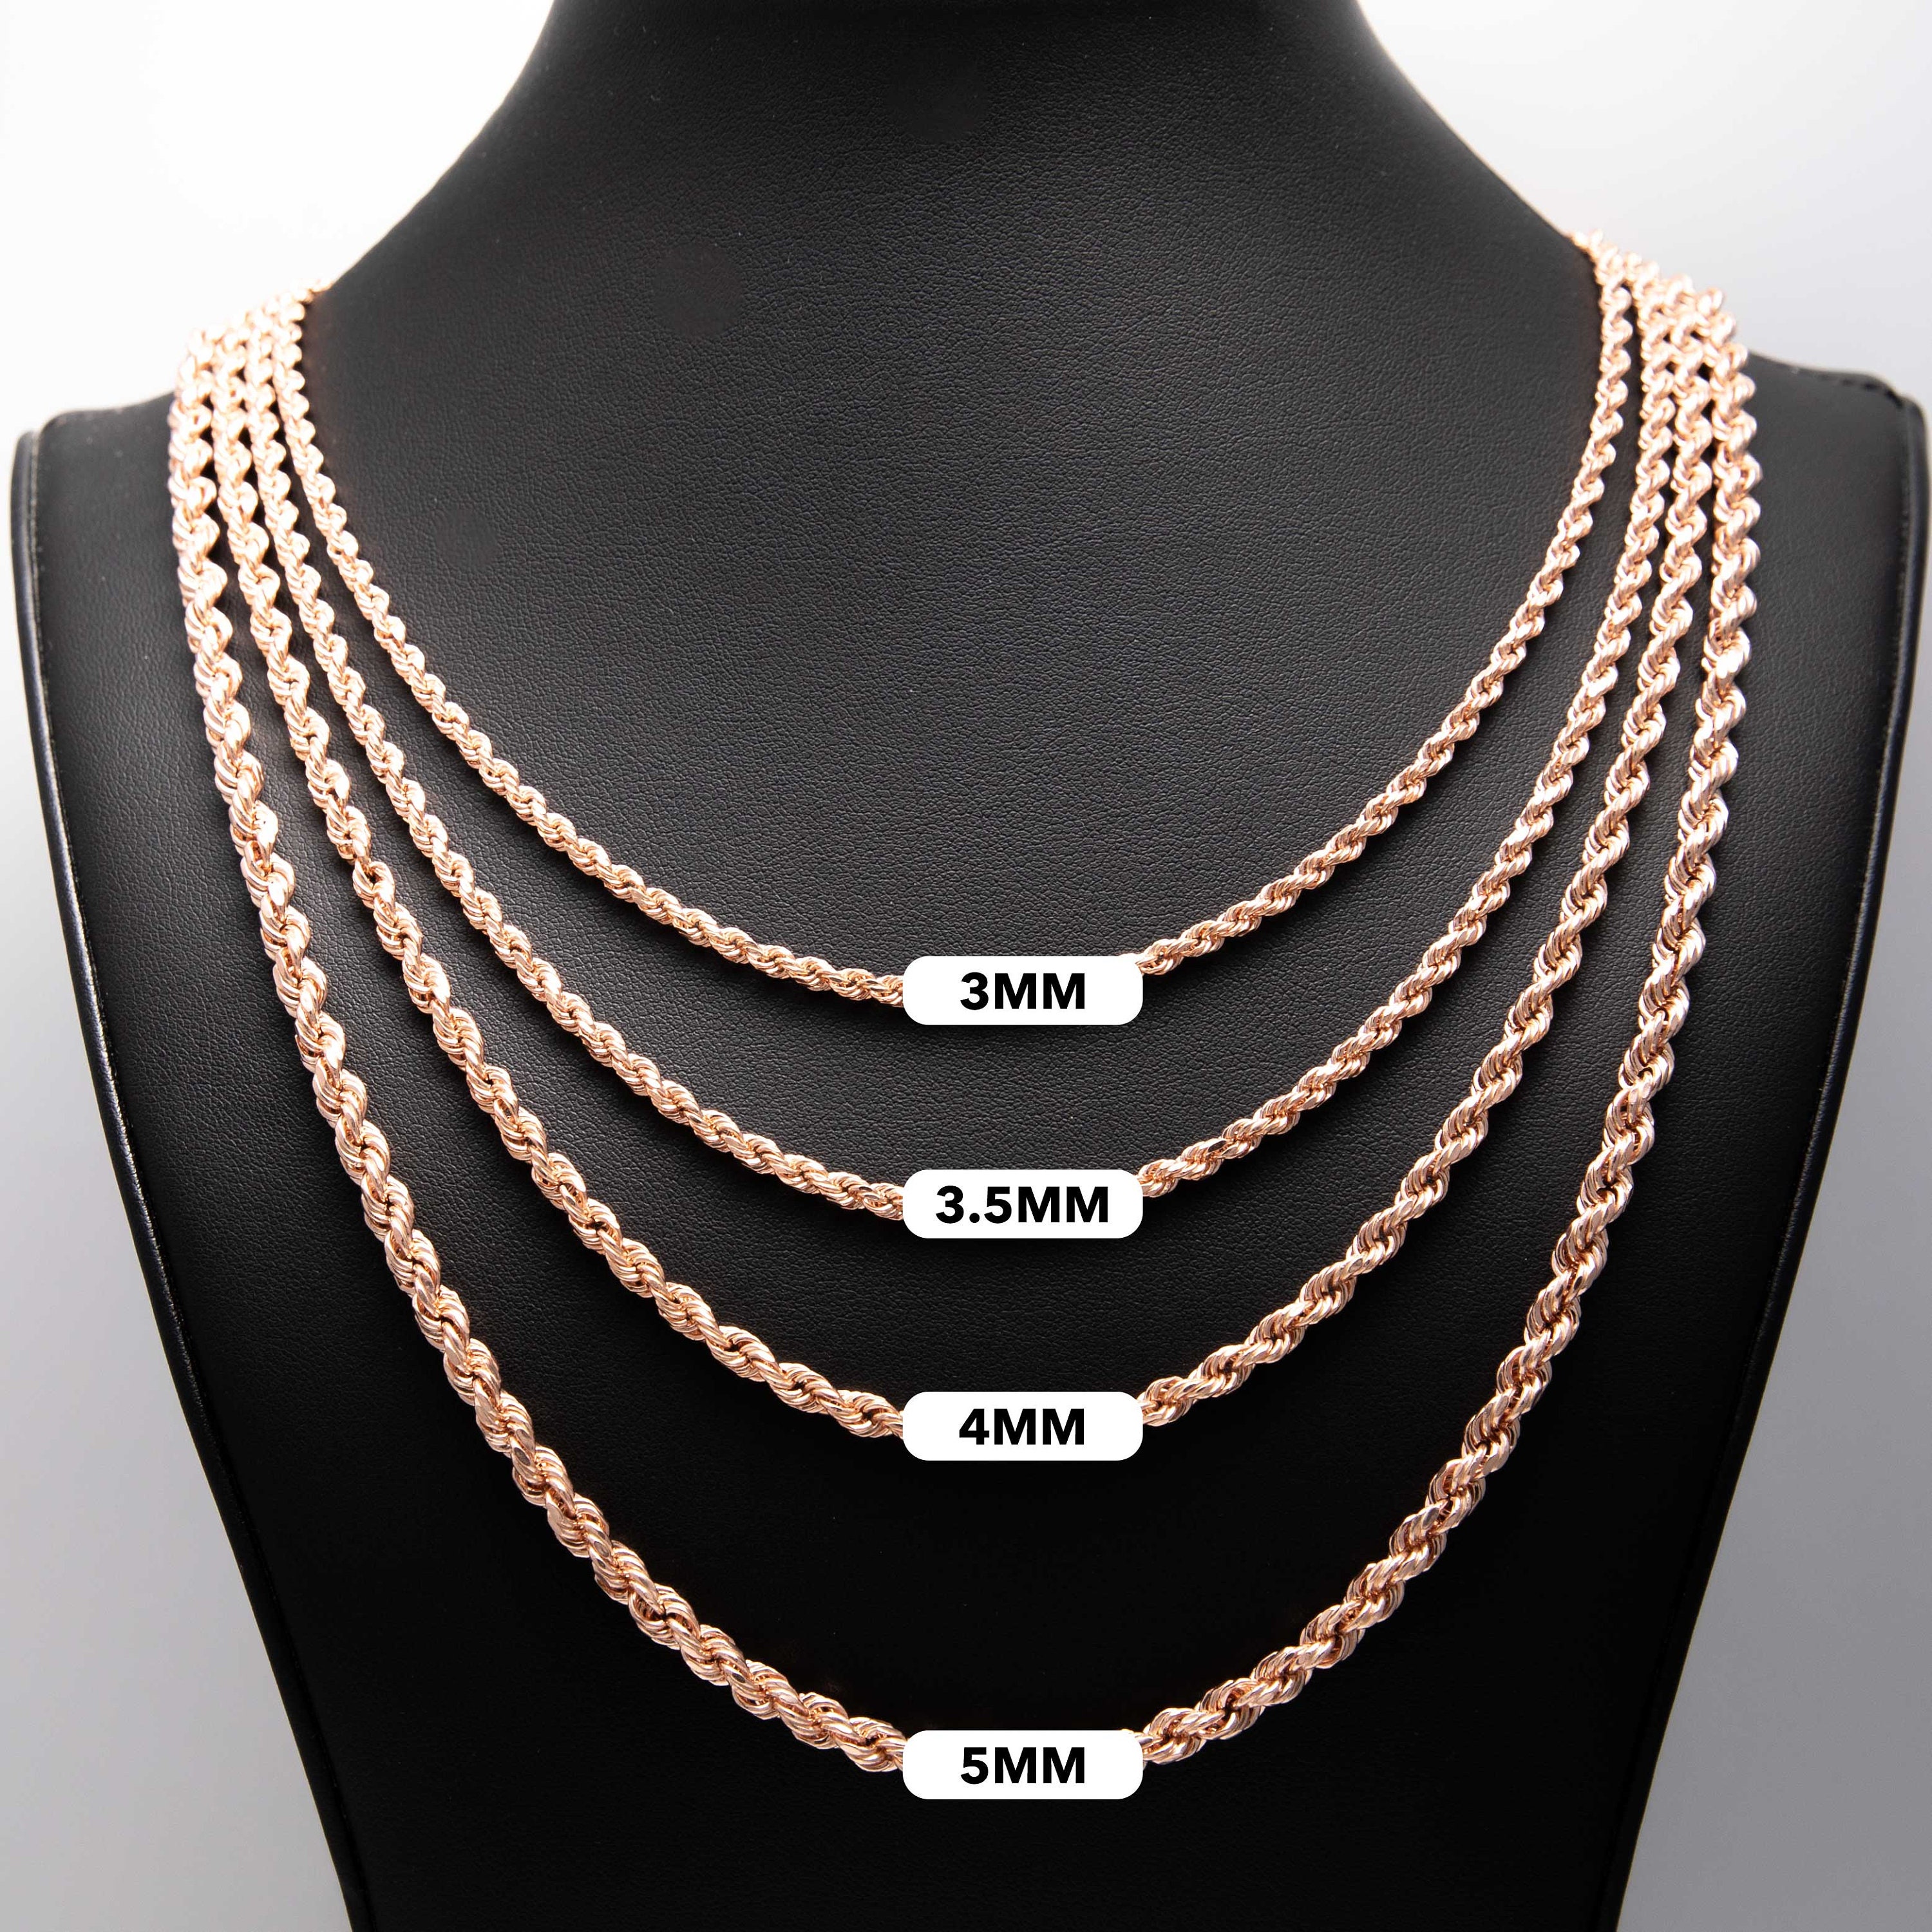 Solid 10K Rose Gold Rope Chain 2.5mm, Rose Gold Chain, Ladies Pink Gold Chain, Genuine Rose Gold Rope Chain